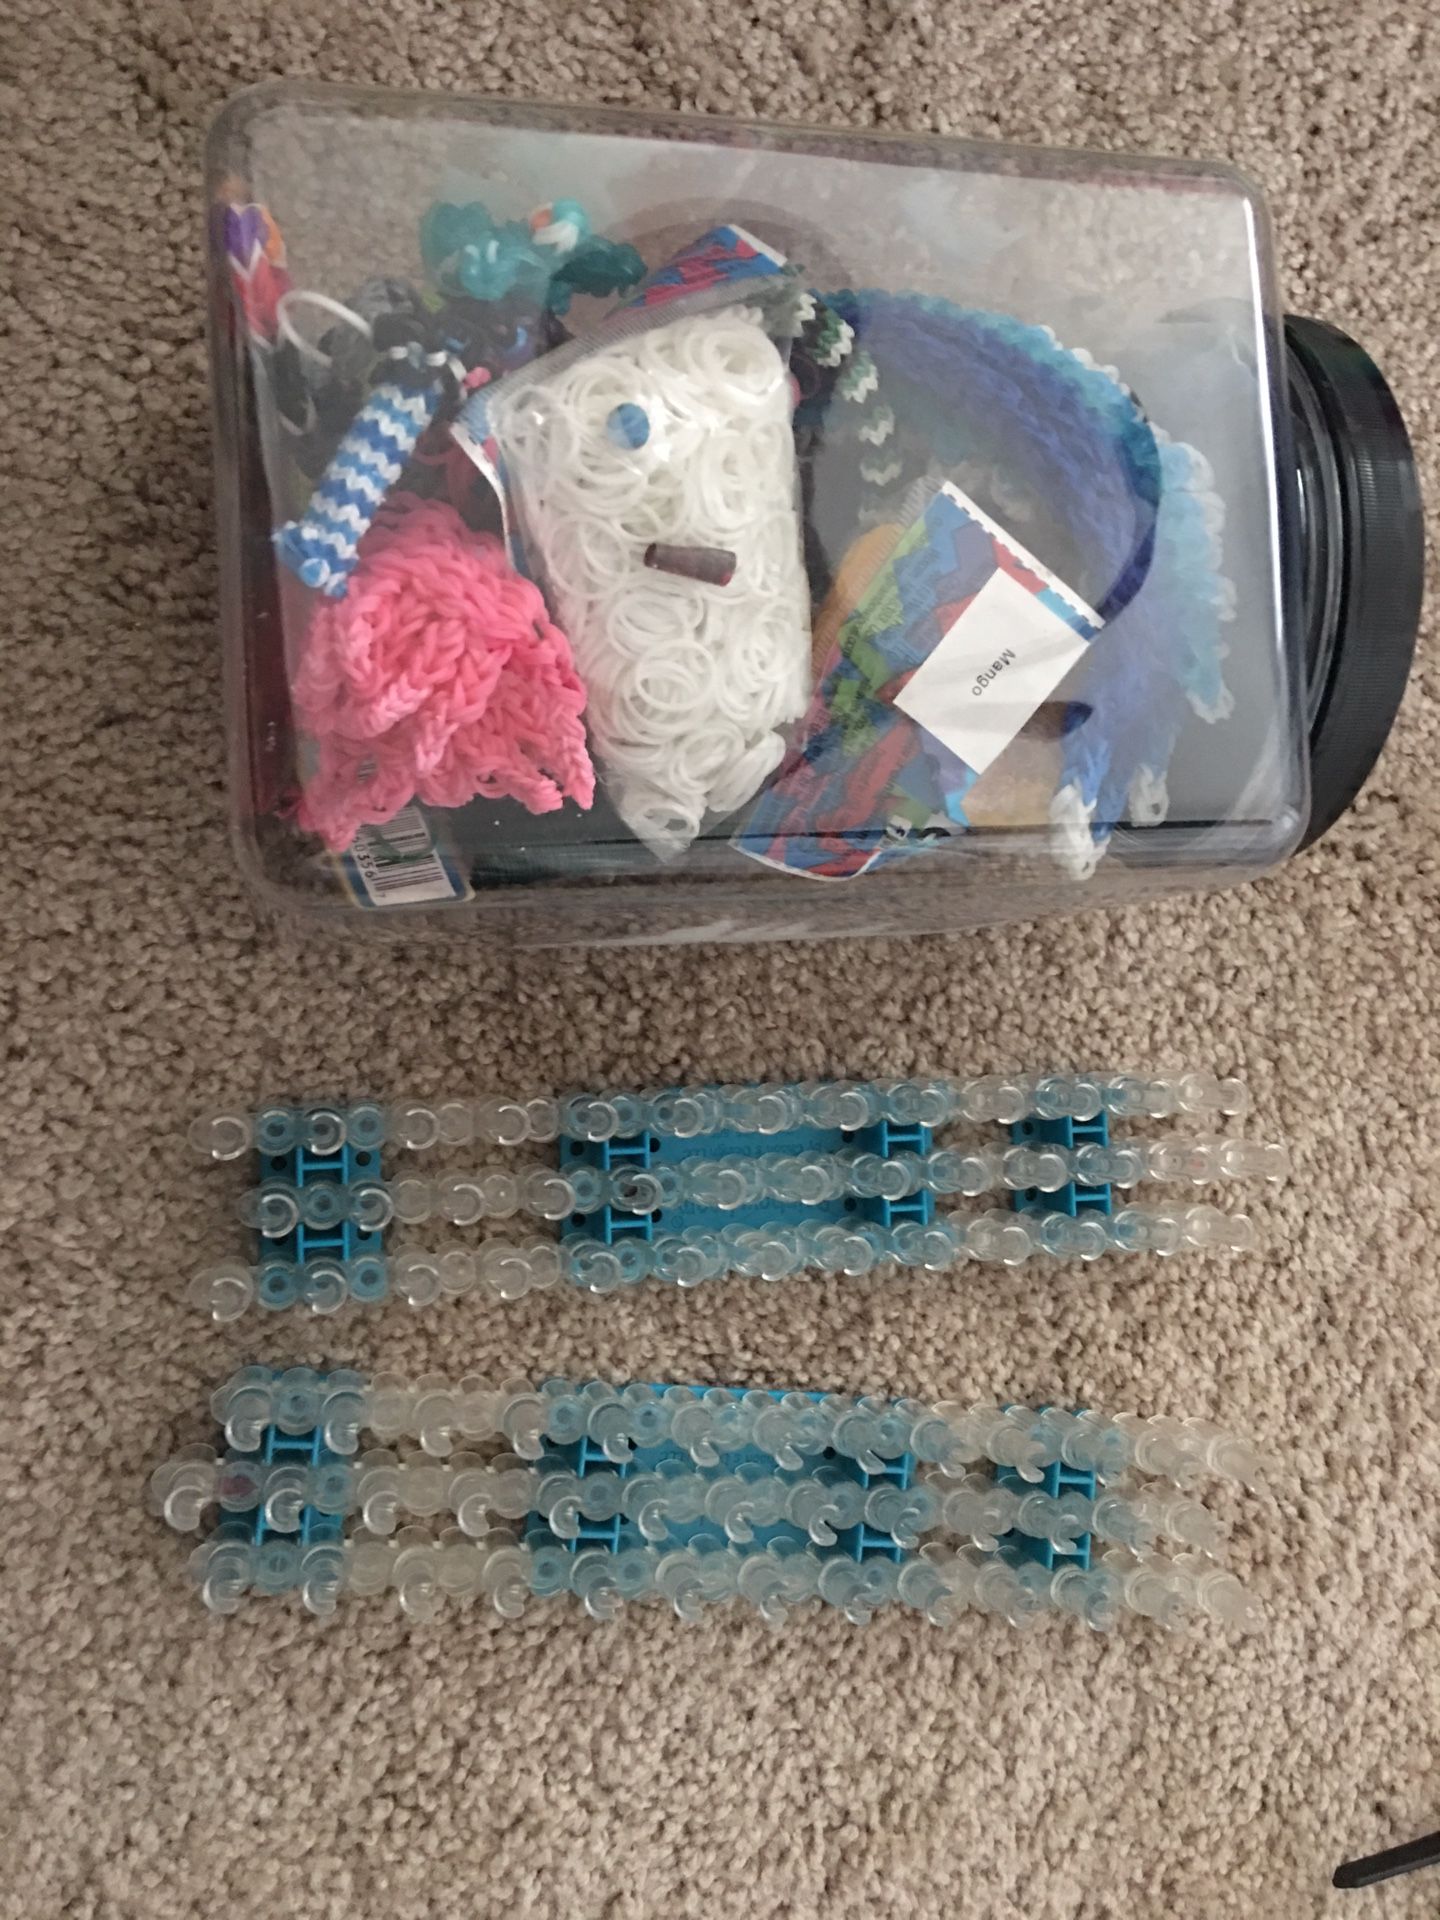 Rainbow Loom and assorted rubber bands